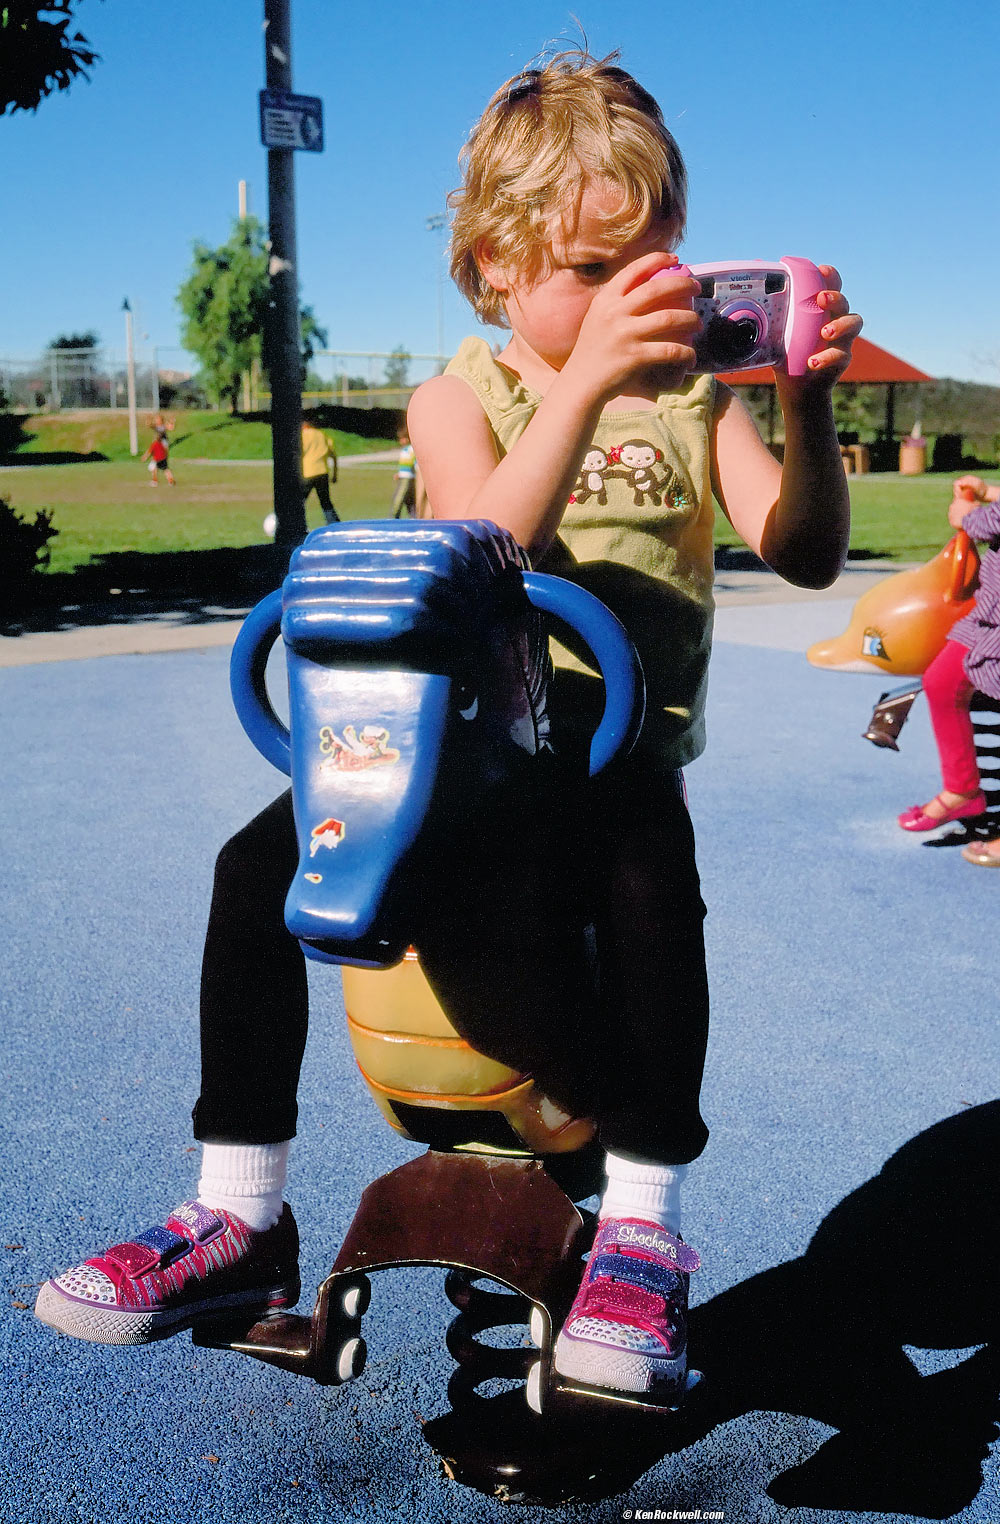 Katie at the park with her VTech 1227 camera. 